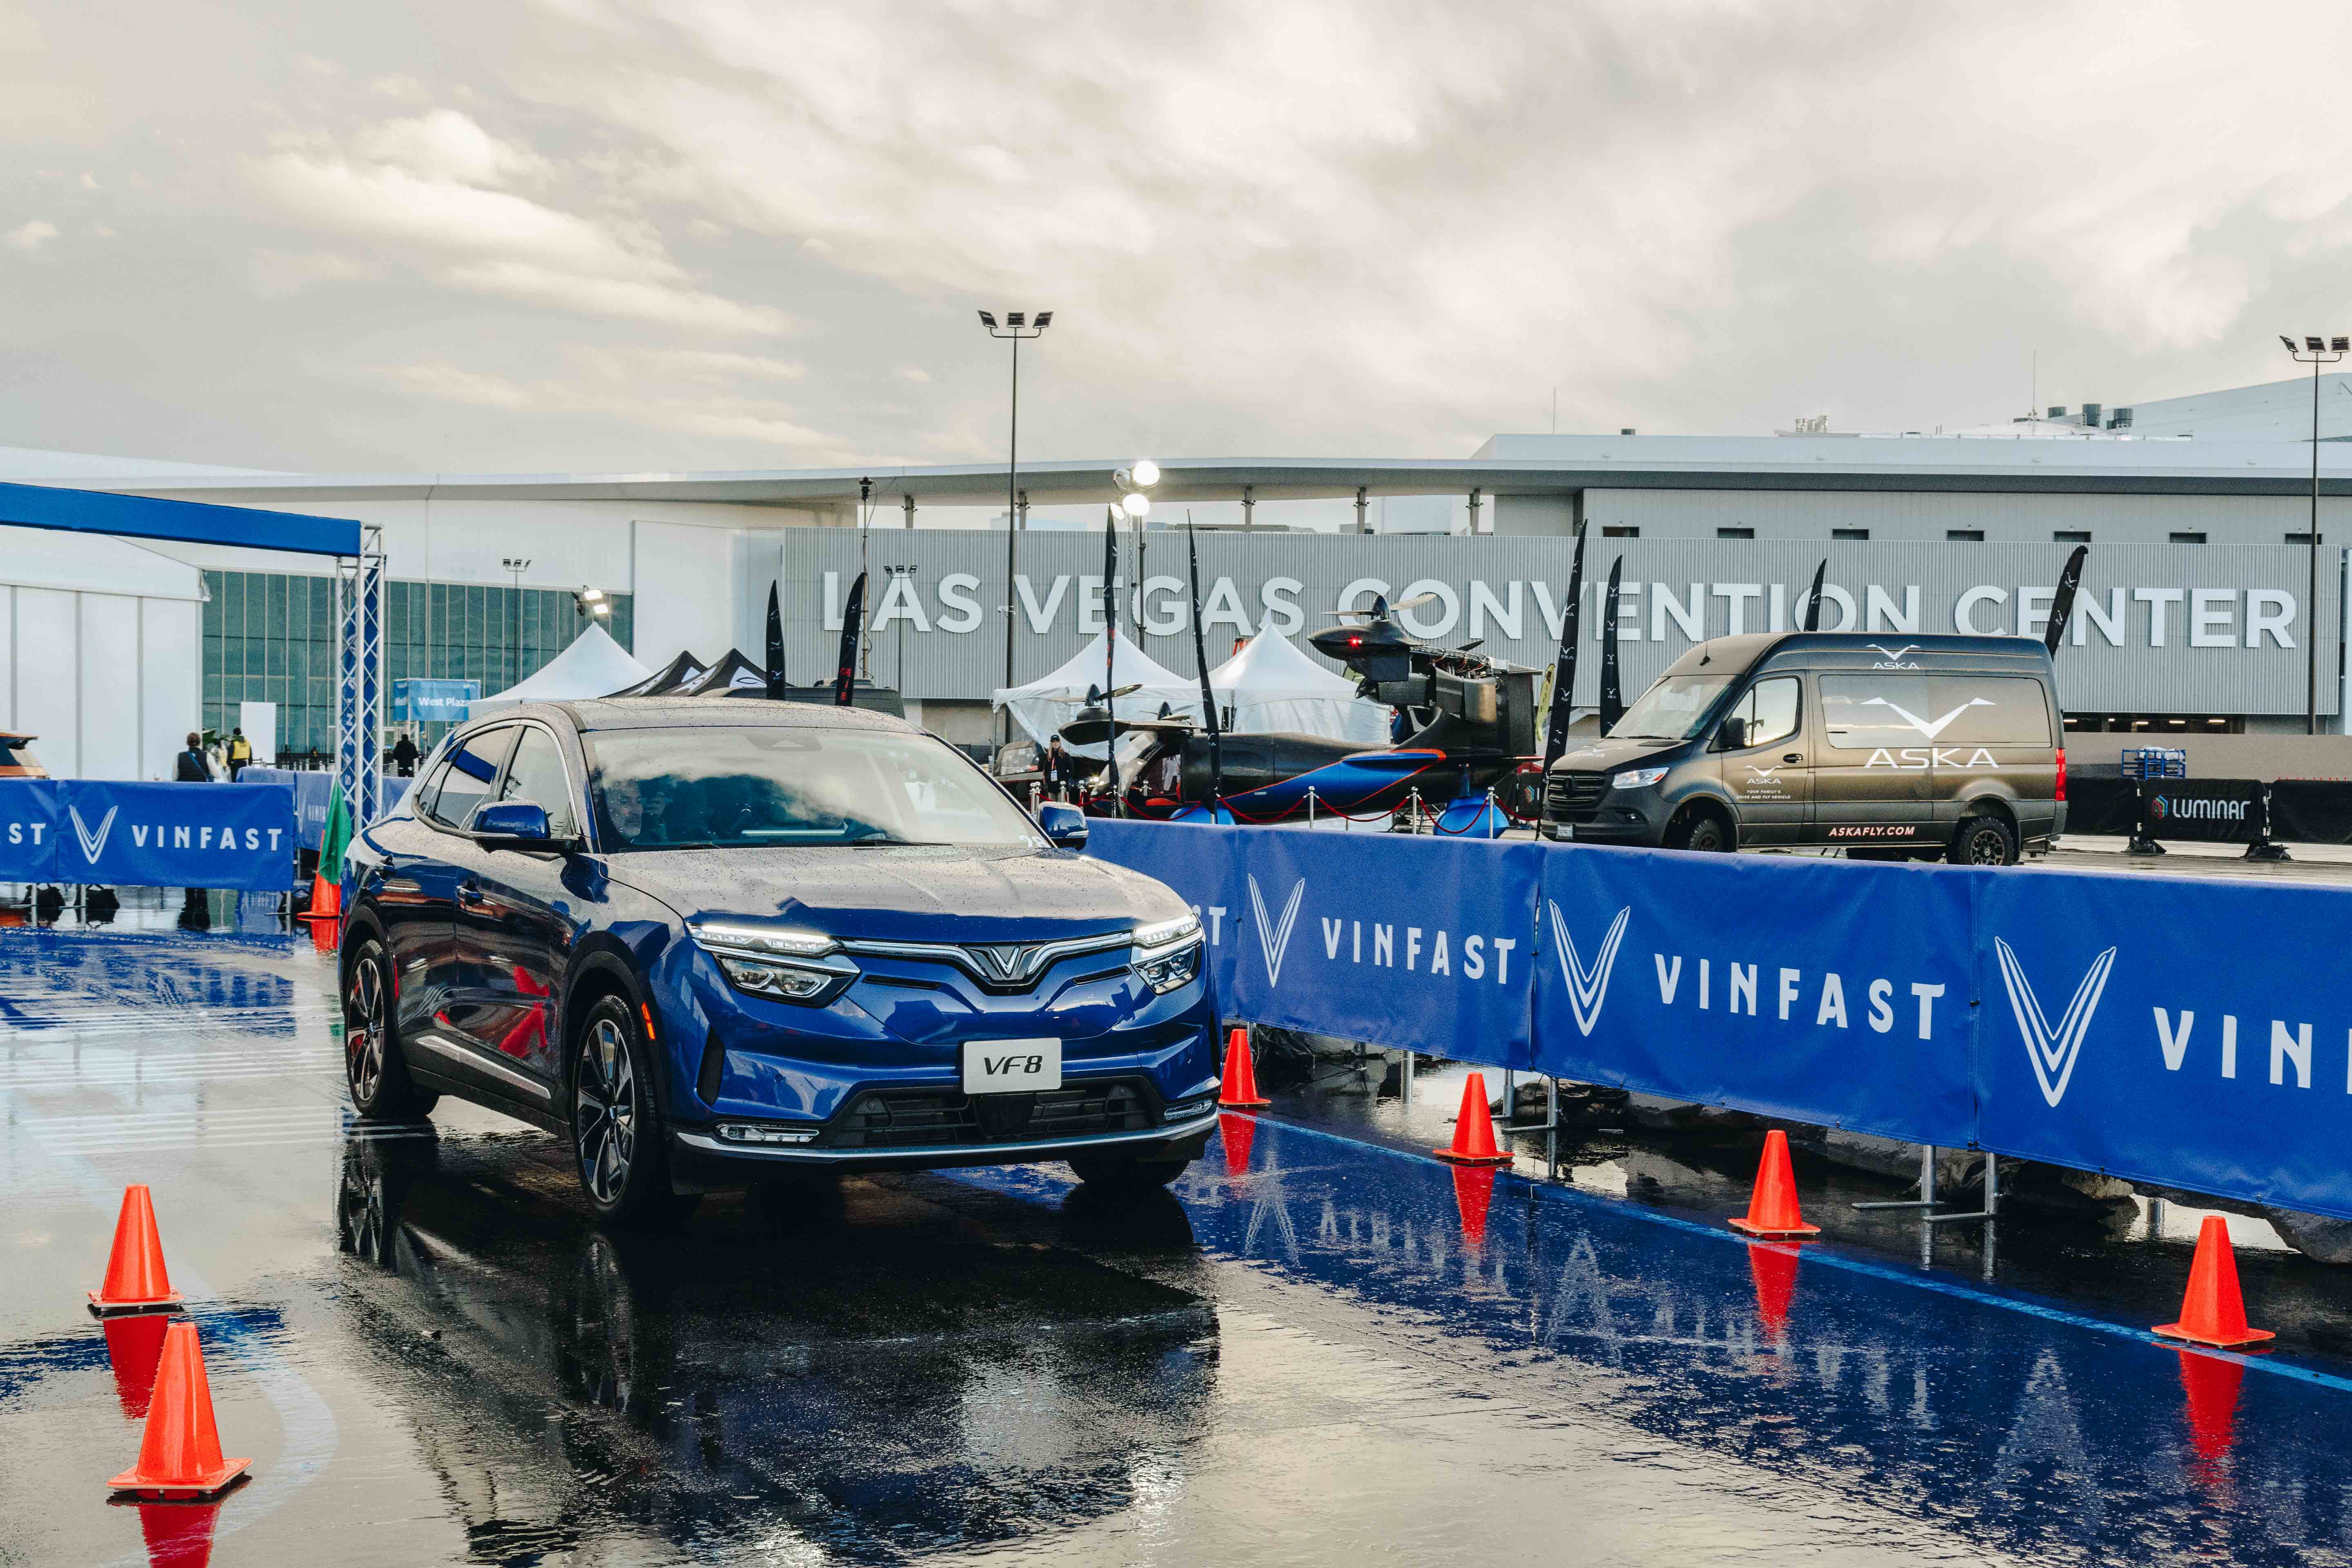 VinAI launches groundbreaking driving technology at CES 2023